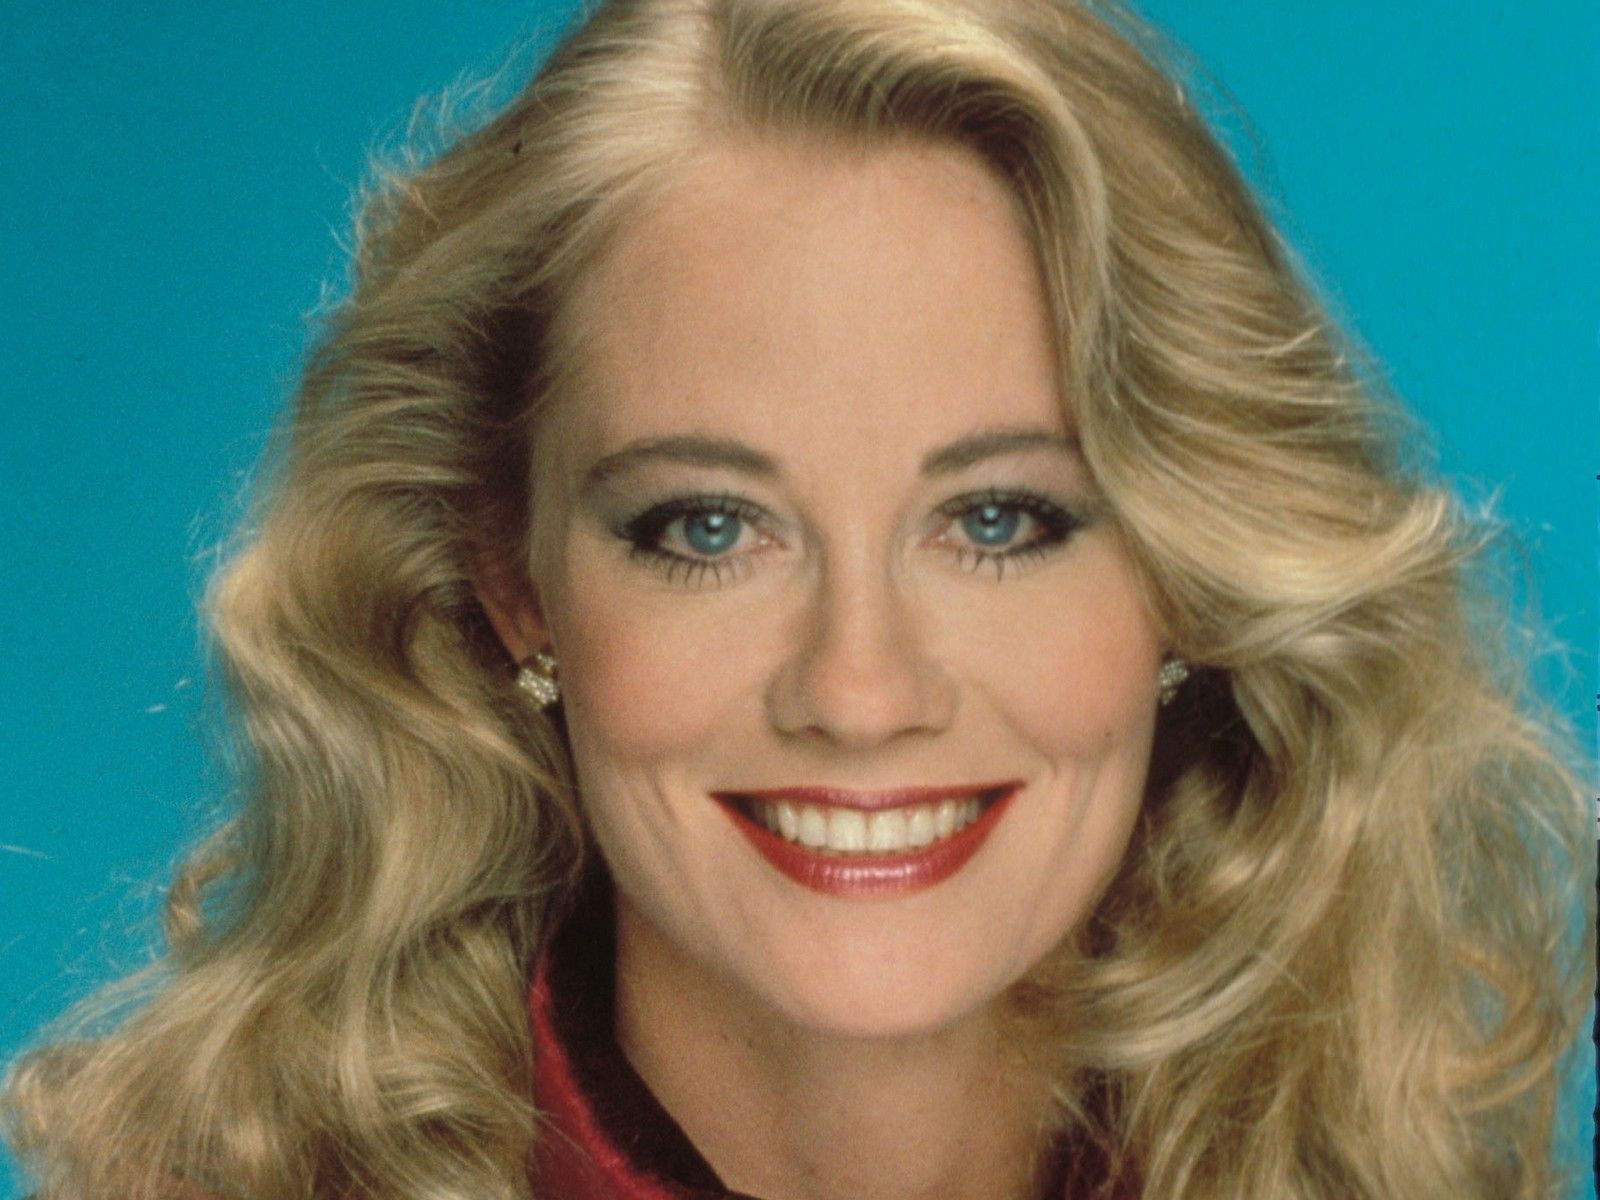 Cybill Shepherd Before Plastic Surgery – Facelift, Body Measurements, Lips, and More!